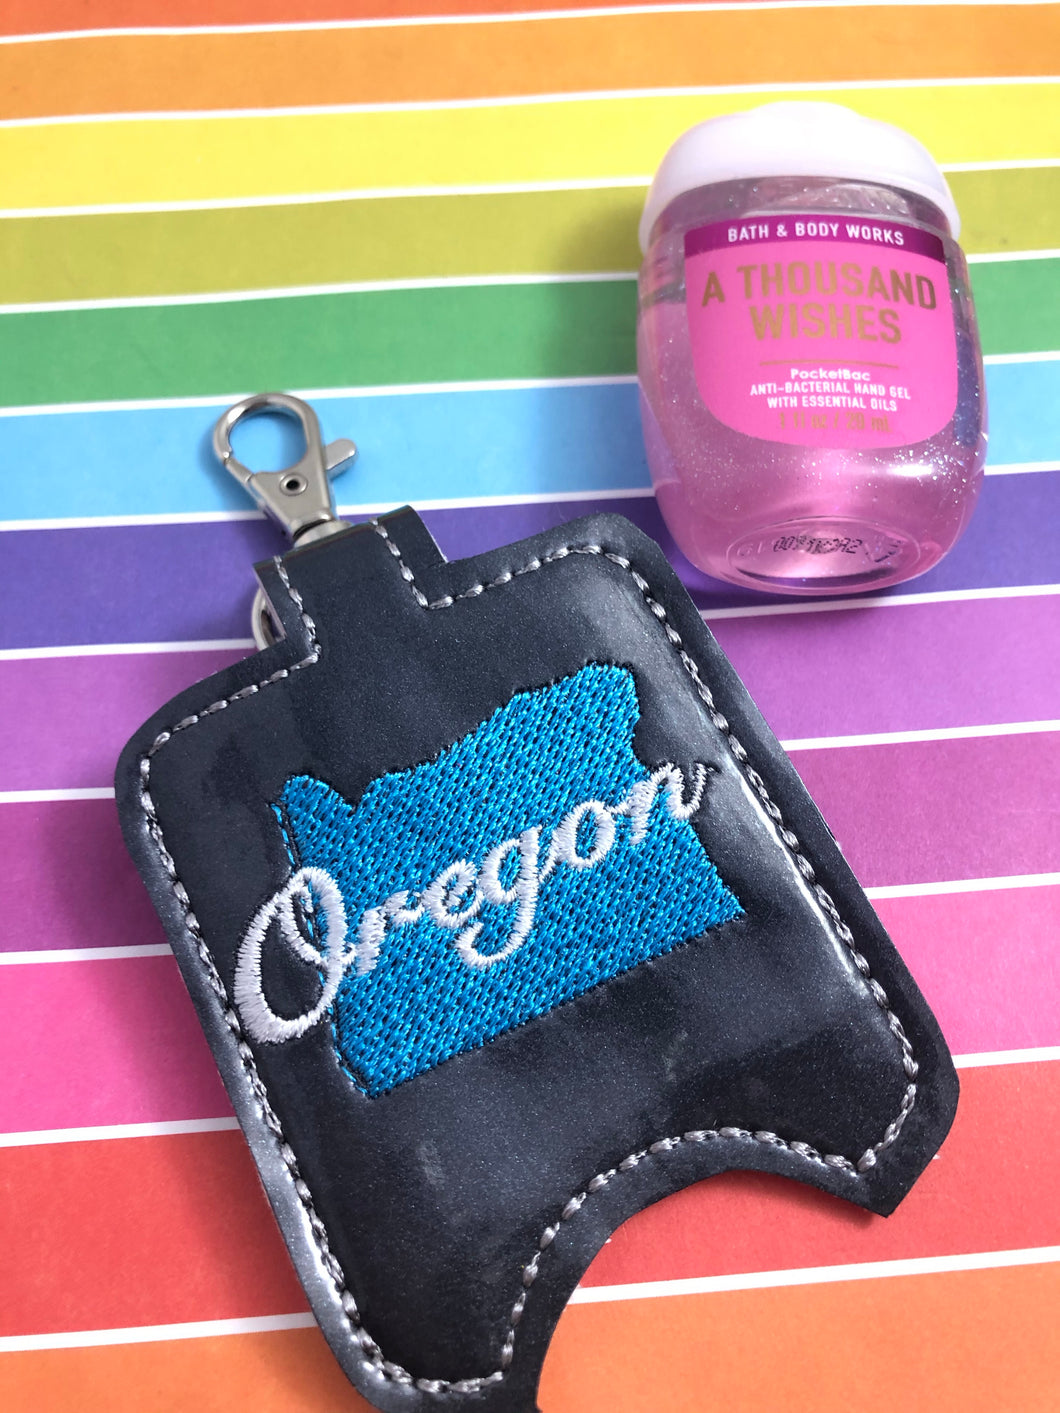 Oregon Hand Sanitizer Holder Snap Tab Version In the Hoop Embroidery Project 1 oz BBW for 5x7 hoops